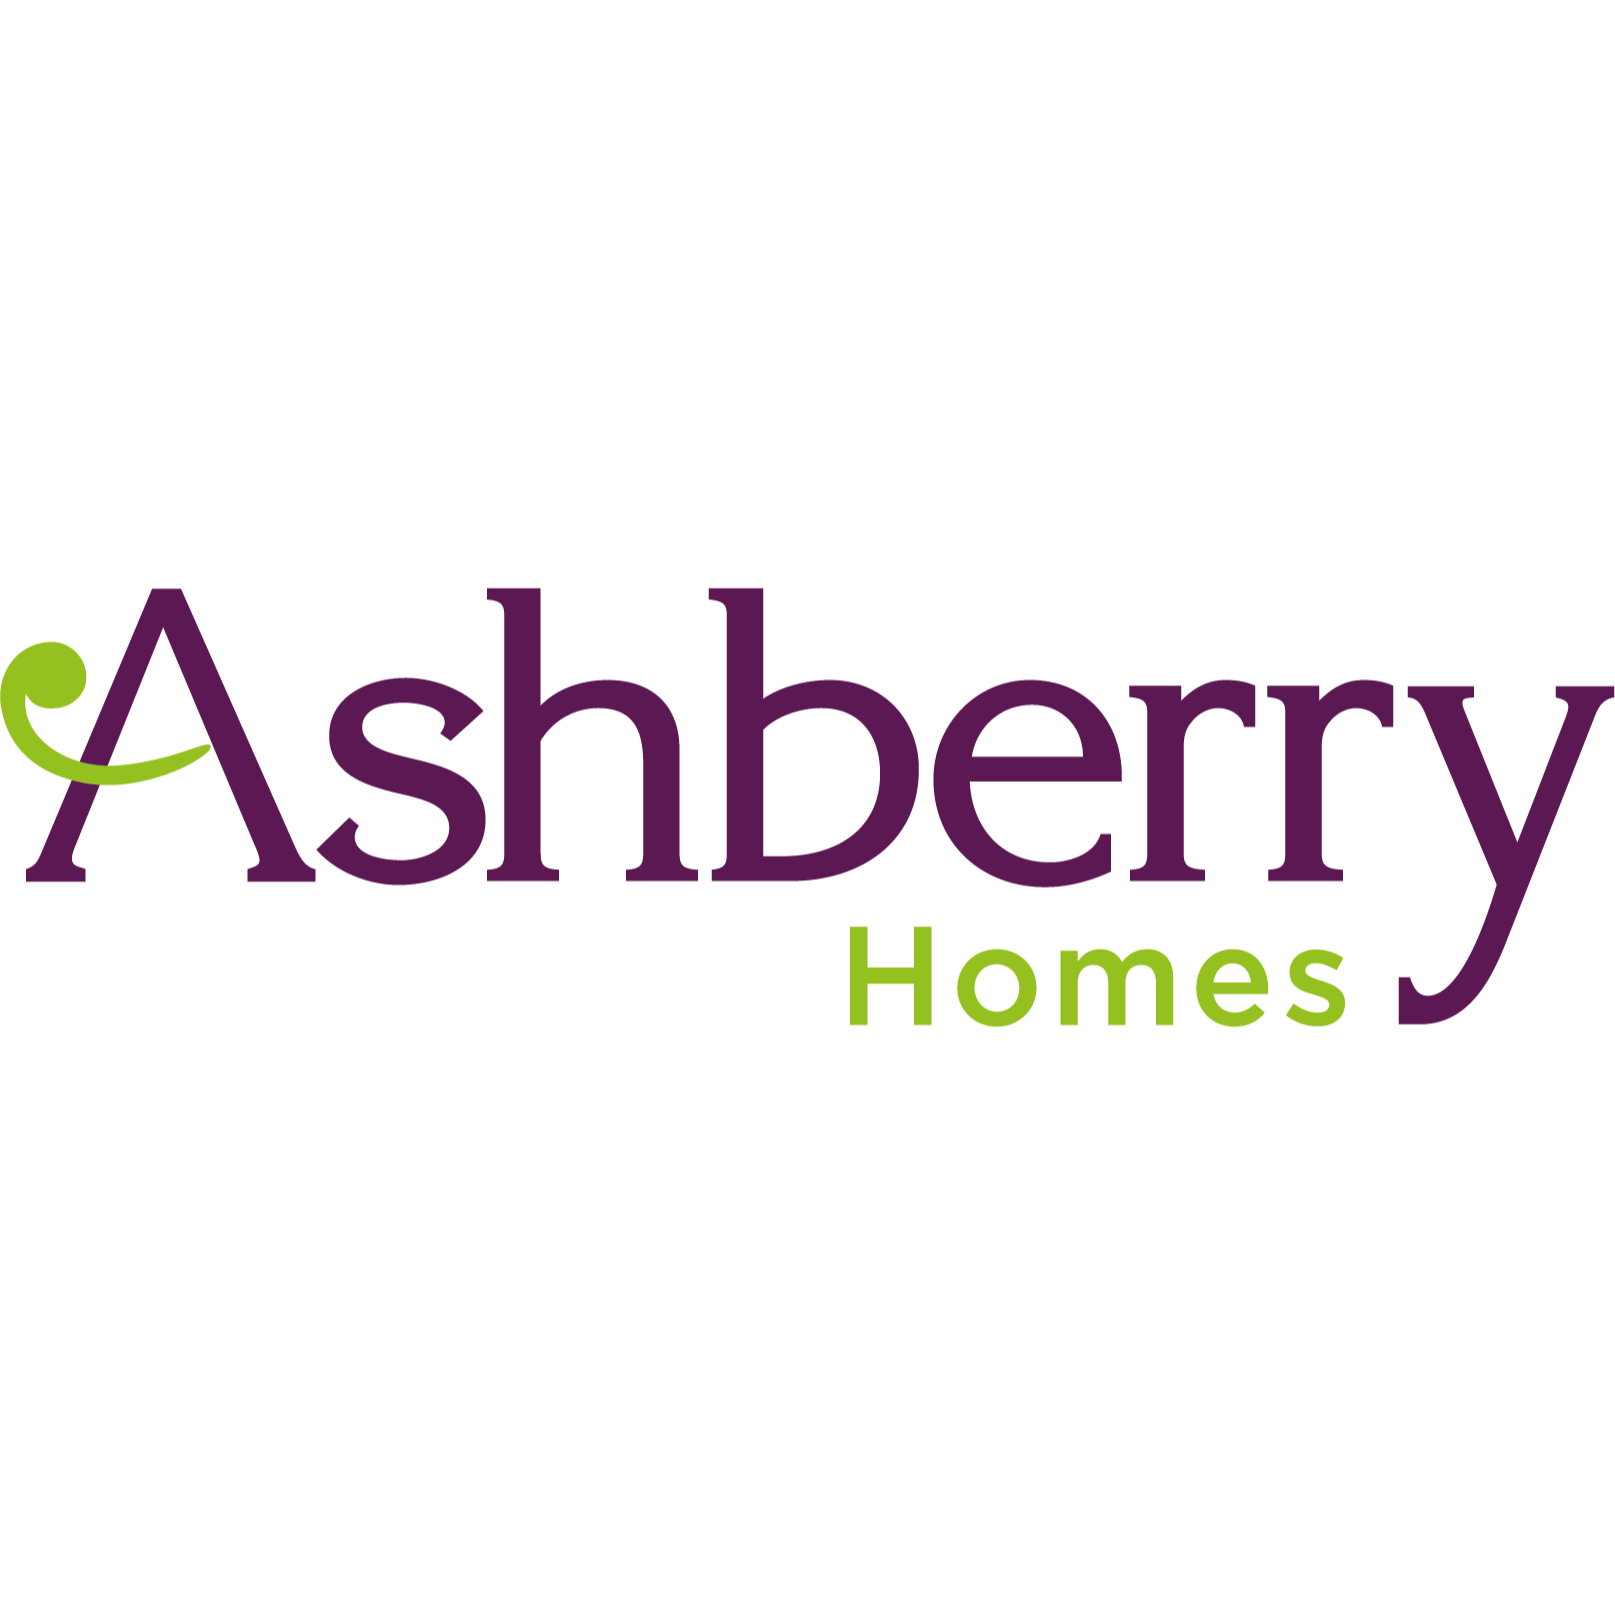 Ashberry Homes - Ashberry at Westcombe Park - Maldon, Essex CM9 8NY - 01621 220350 | ShowMeLocal.com